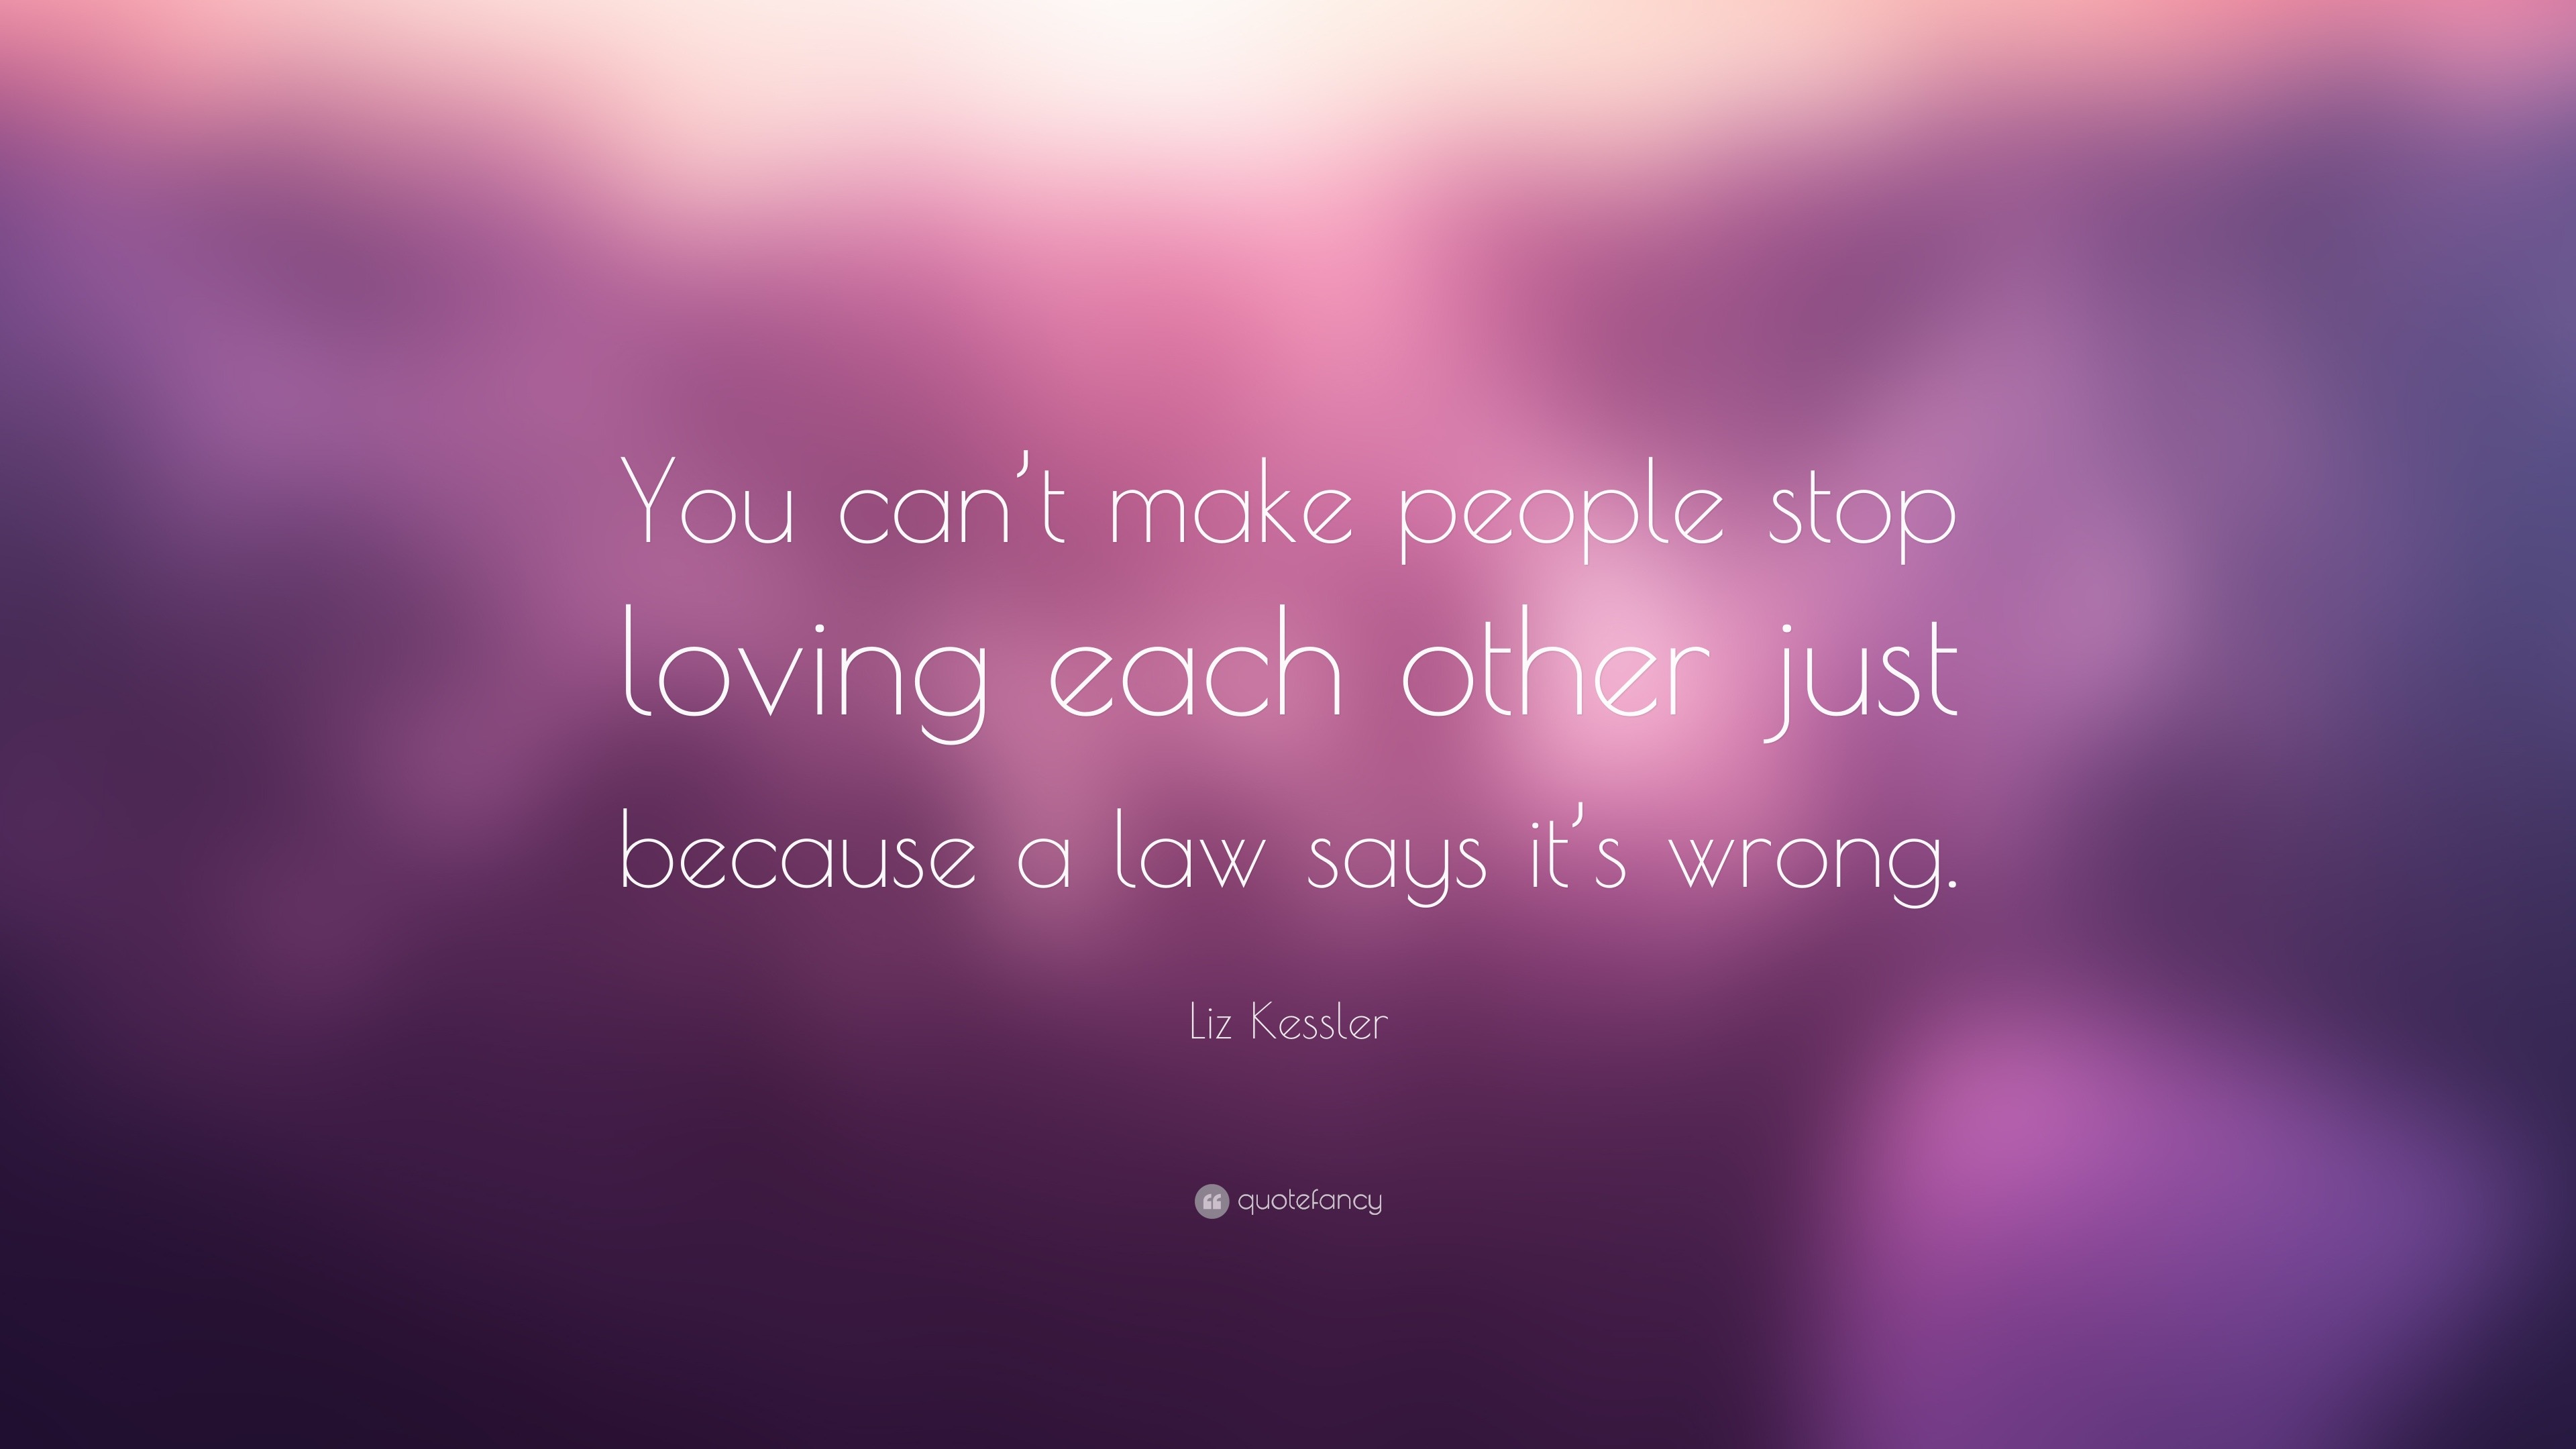 Liz Kessler Quote “You can t make people stop loving each other just